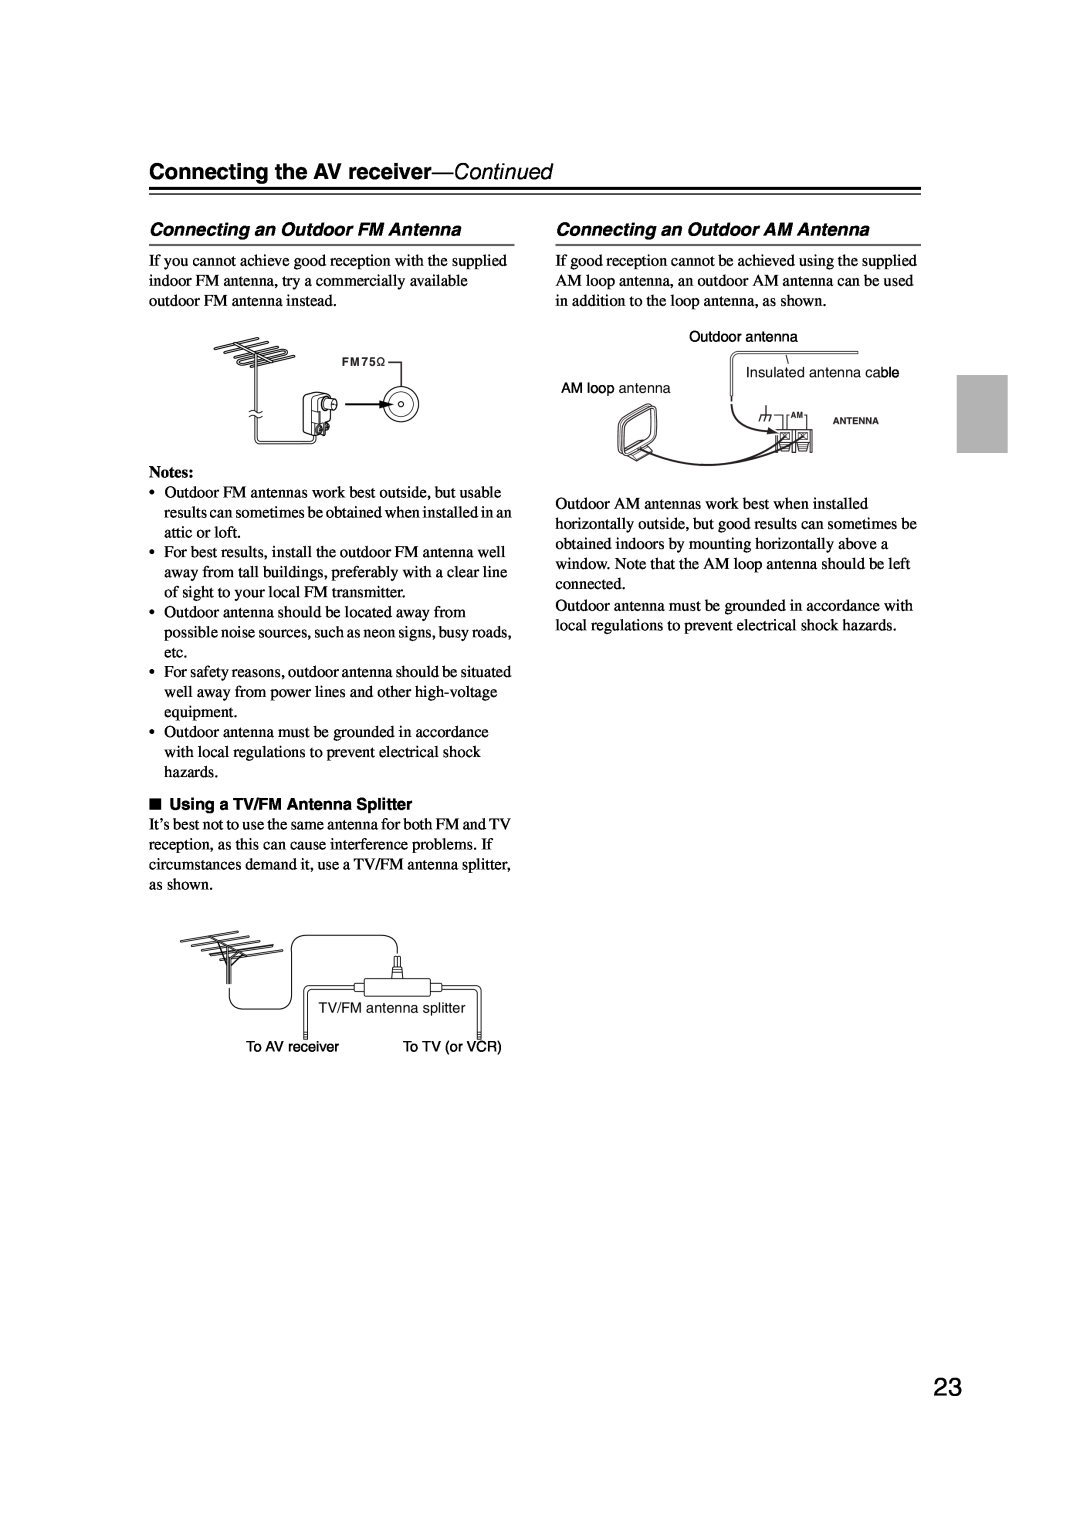 Onkyo 29344934 Connecting an Outdoor FM Antenna, Connecting an Outdoor AM Antenna, Connecting the AV receiver—Continued 